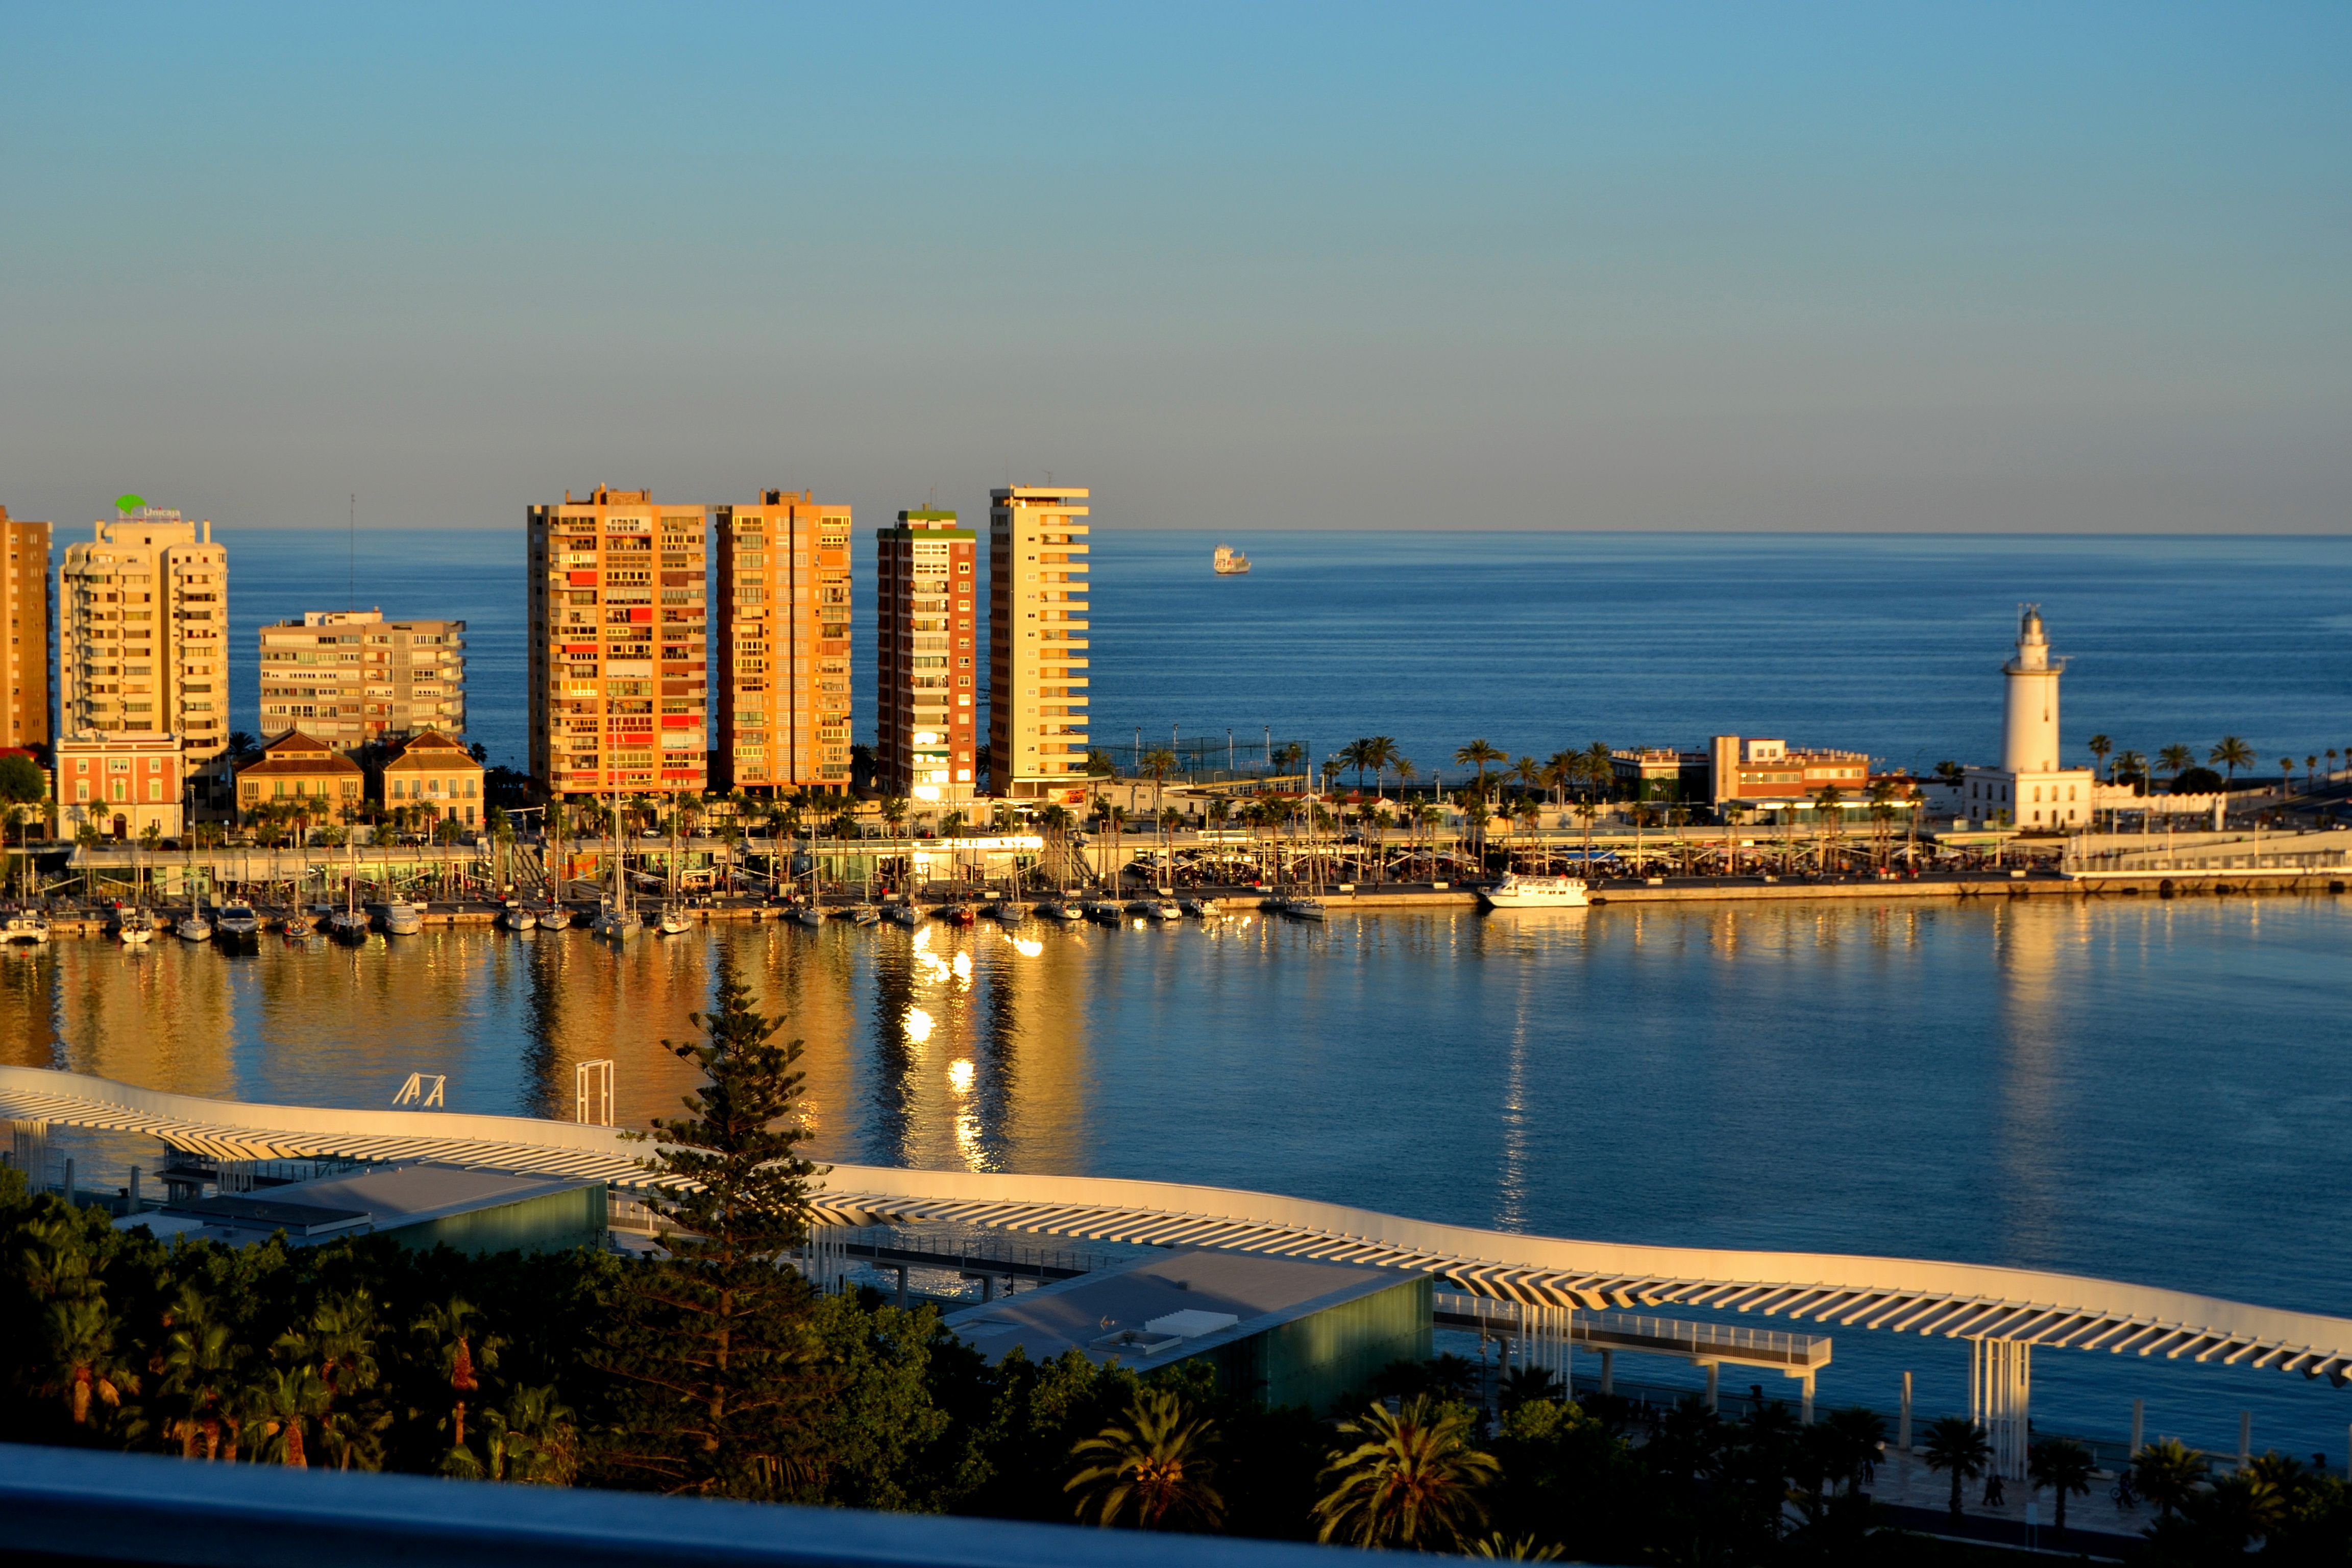 Everything you need is in the shopping centers of Malaga